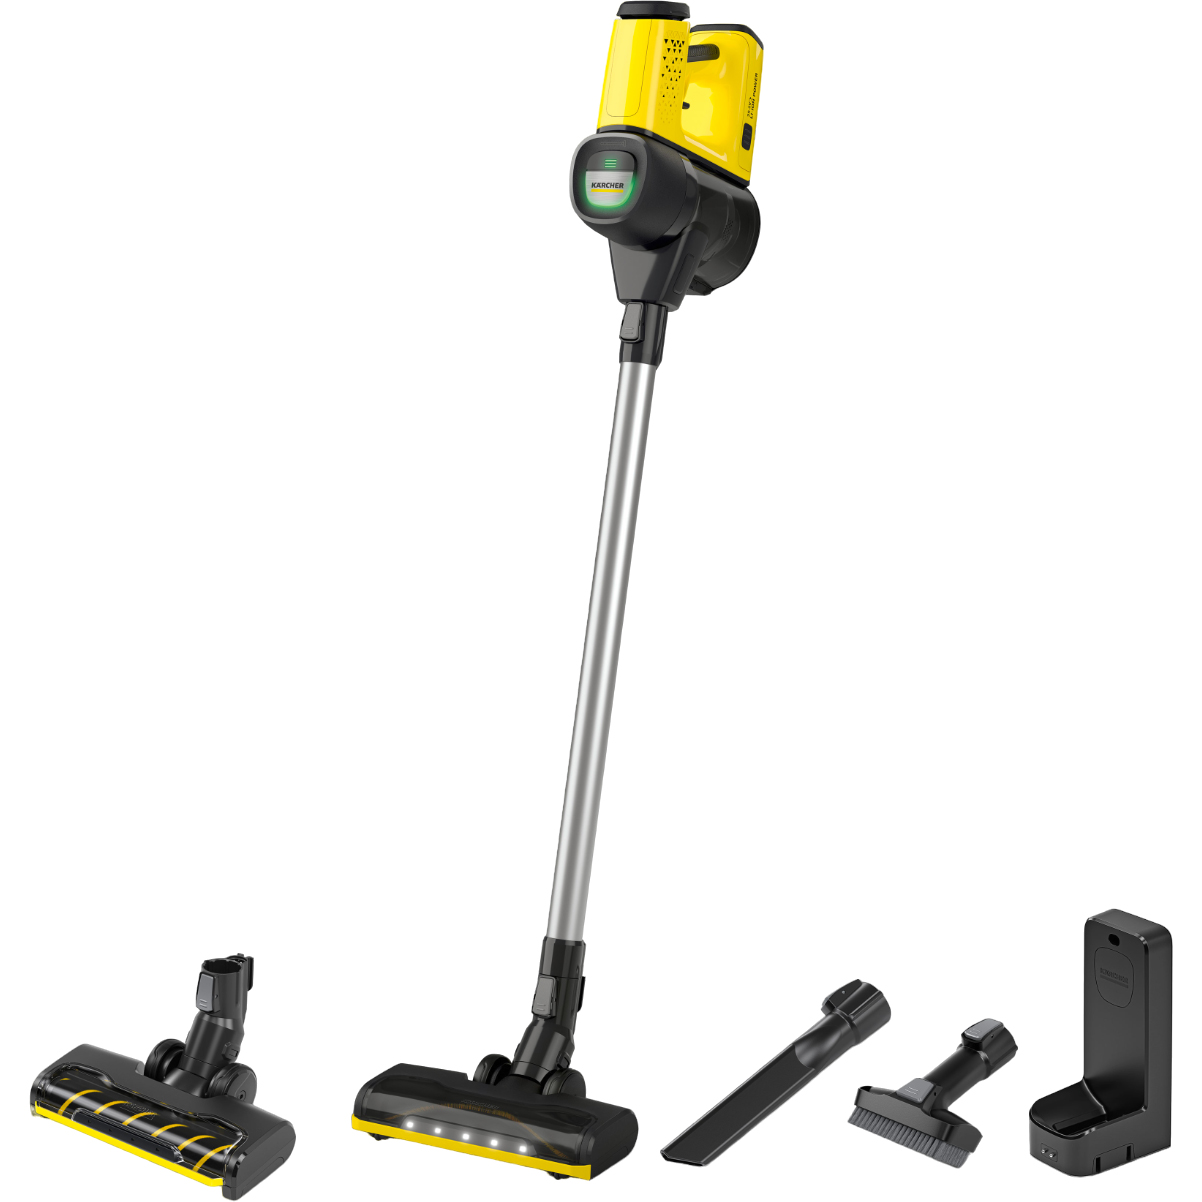 фото Пылесос karcher vc 6 cordless ourfamily limited edition kärcher